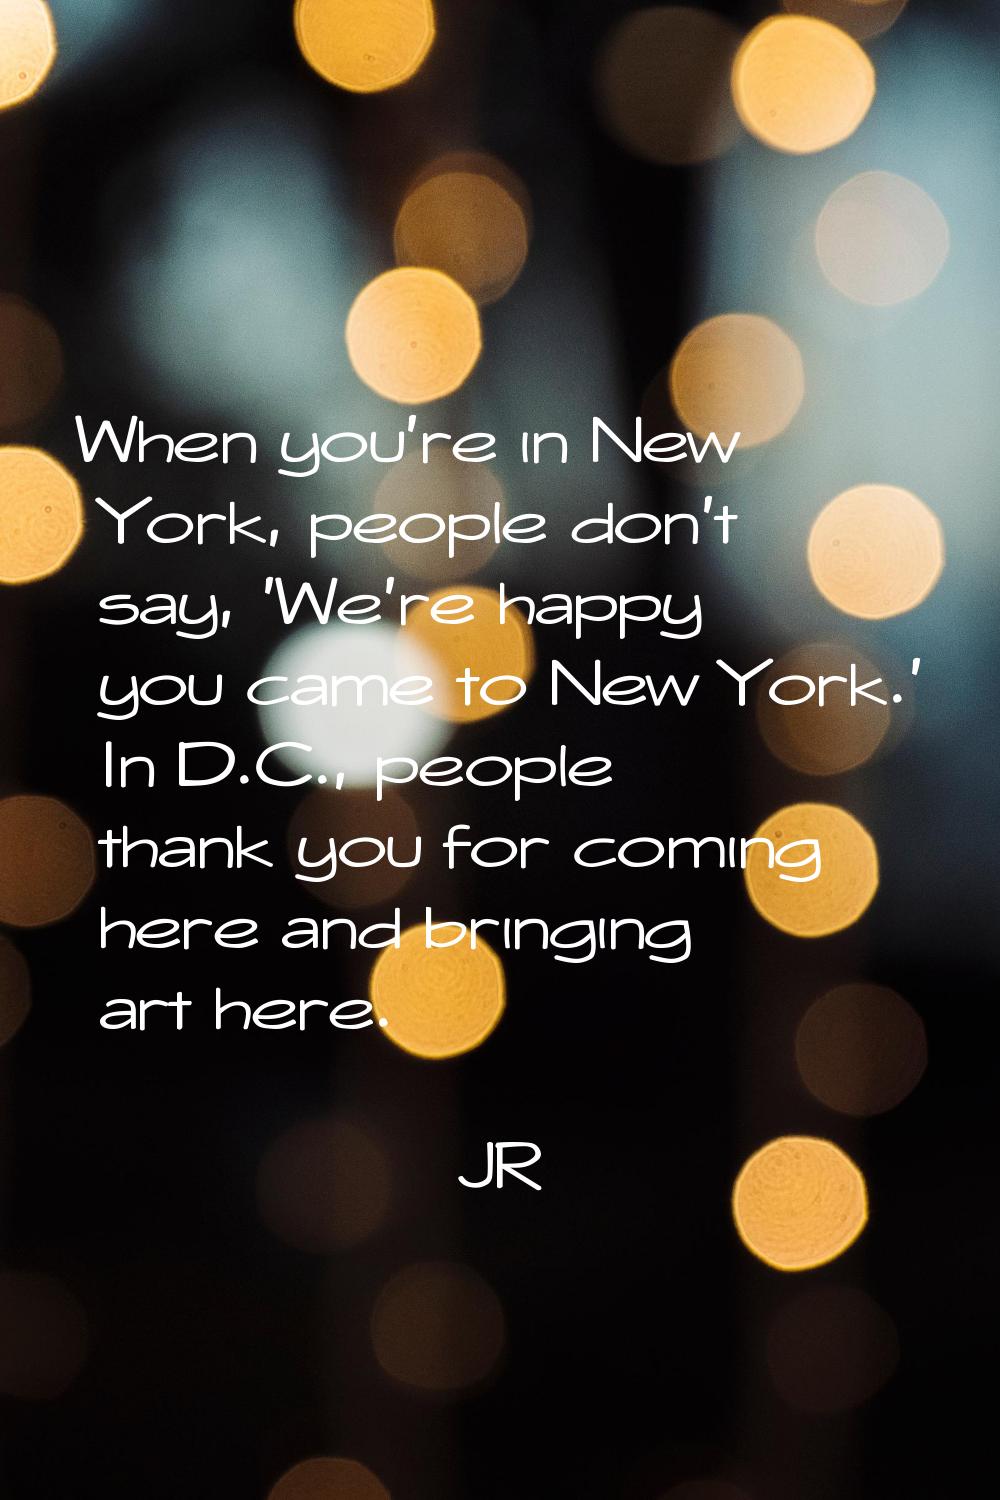 When you're in New York, people don't say, 'We're happy you came to New York.' In D.C., people than